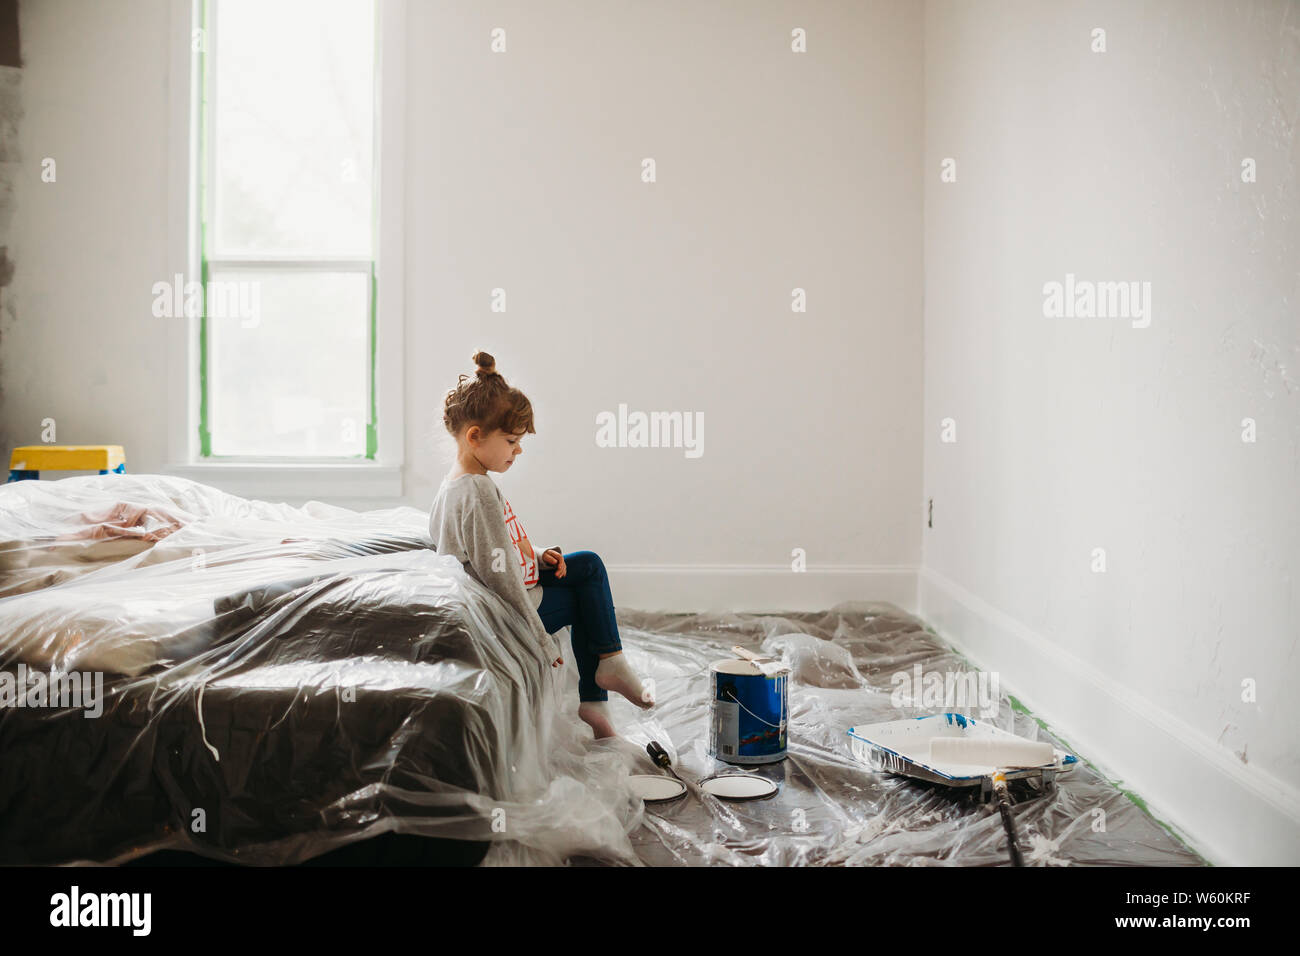 Young girl sitting on bed in freshly painted white room Stock Photo